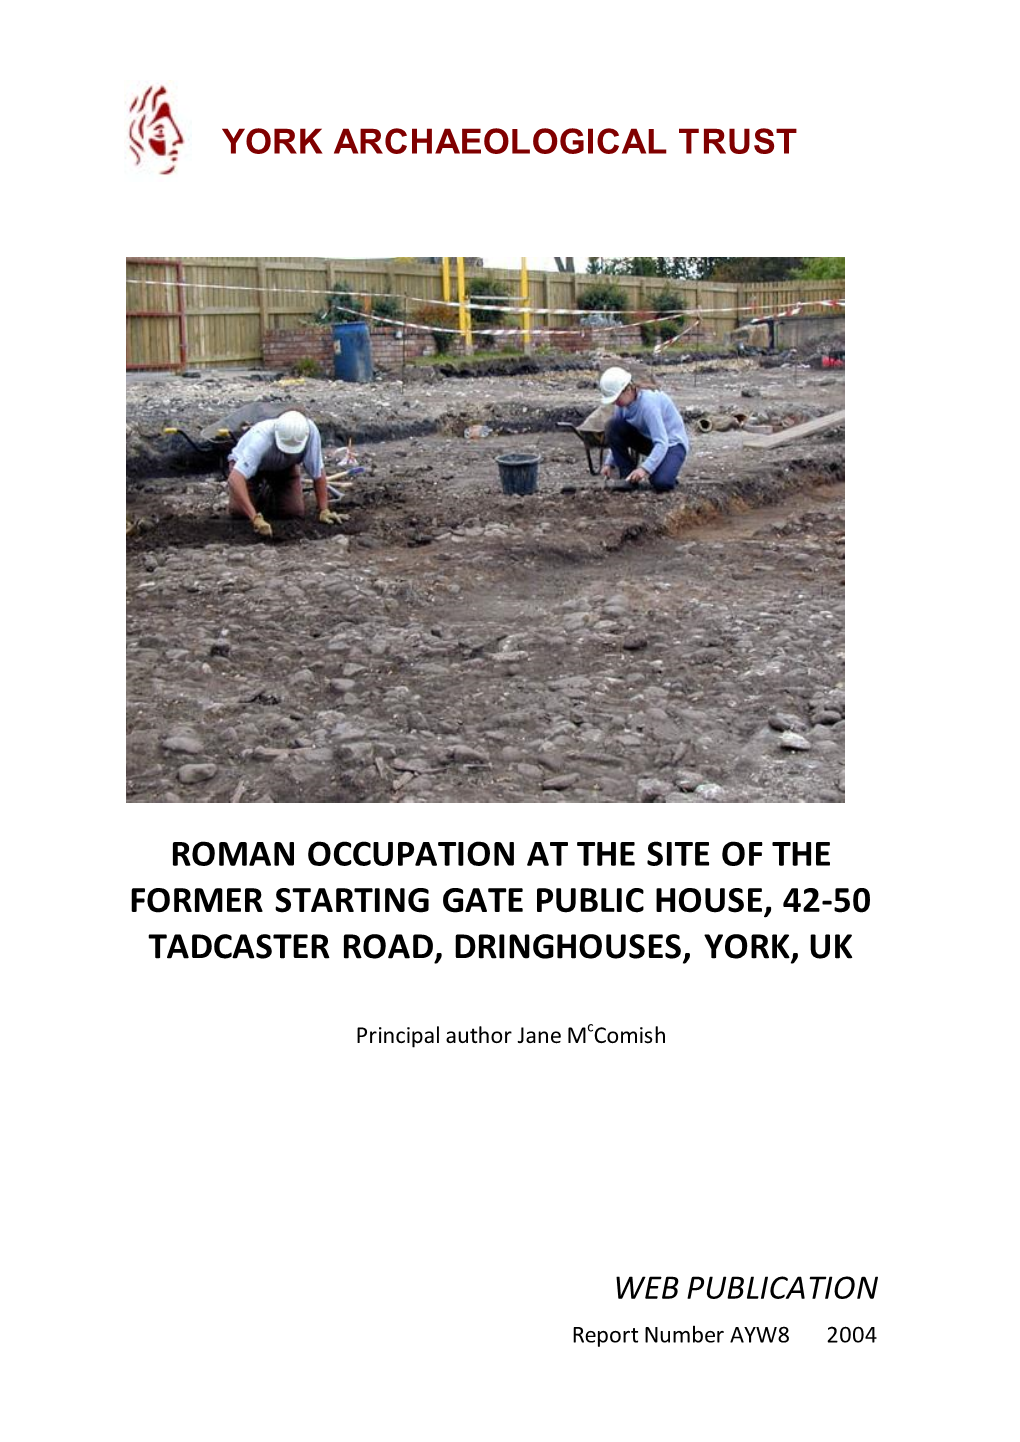 Roman Occupation at the Site of the Former Starting Gate Public House, 42-50 Tadcaster Road, Dringhouses, York, Uk